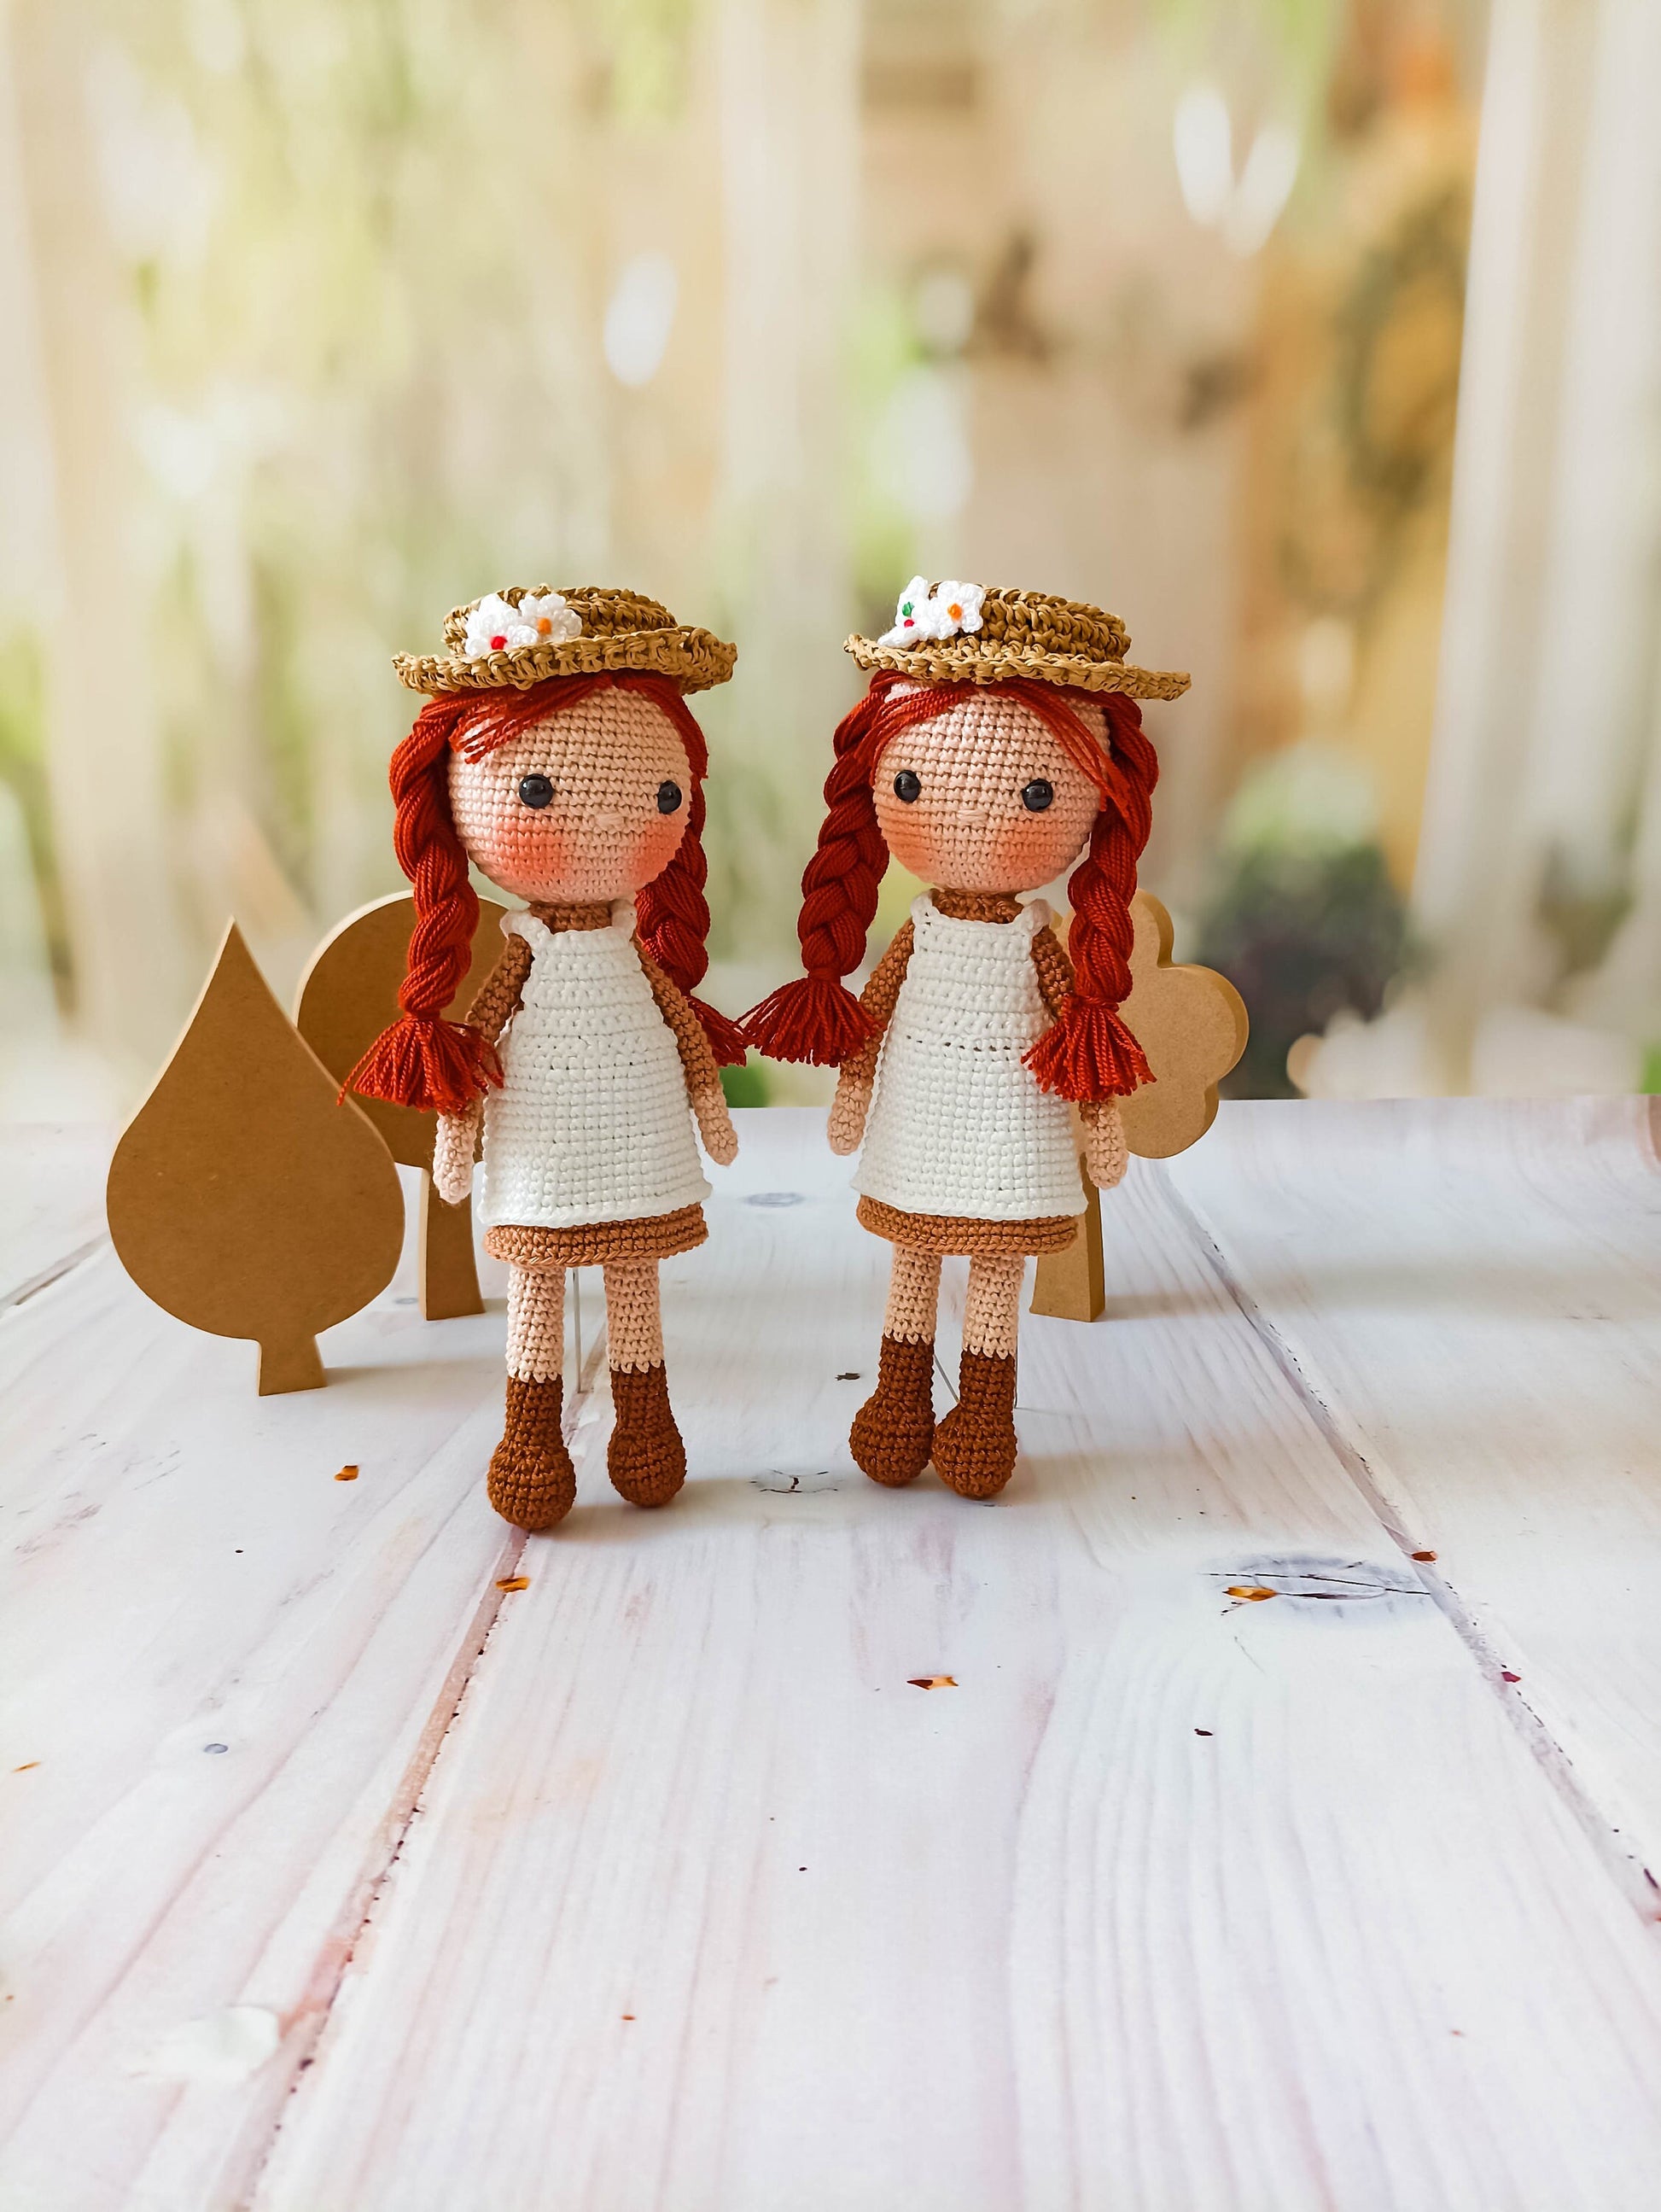 Anne of Green Gables Doll, Anne Shirley Doll, Crochet Dolls for Sale, Amigurumi Doll Finished, Handmade Doll for Girls, Hand Made Doll, Gift